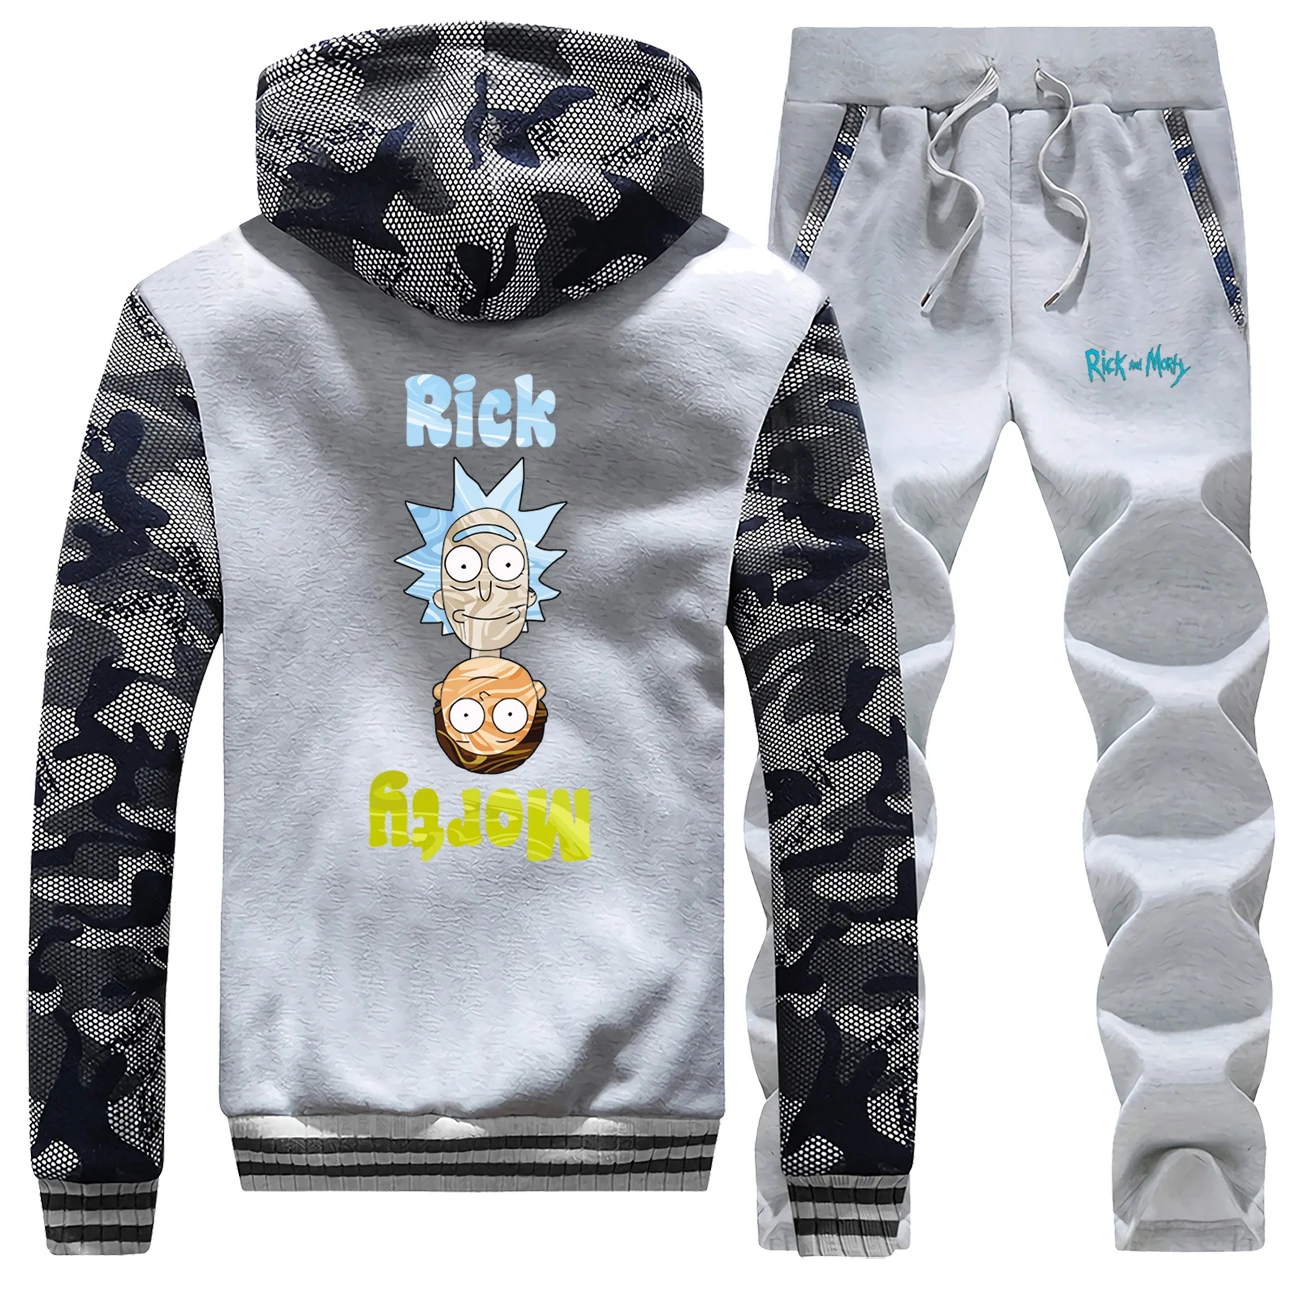 Rick And Morty Mens Jacket Sports Trousers Winter Thick Male Warm Hoodie Casual Brand Clothes Men Sweat Suits Outwear Tops